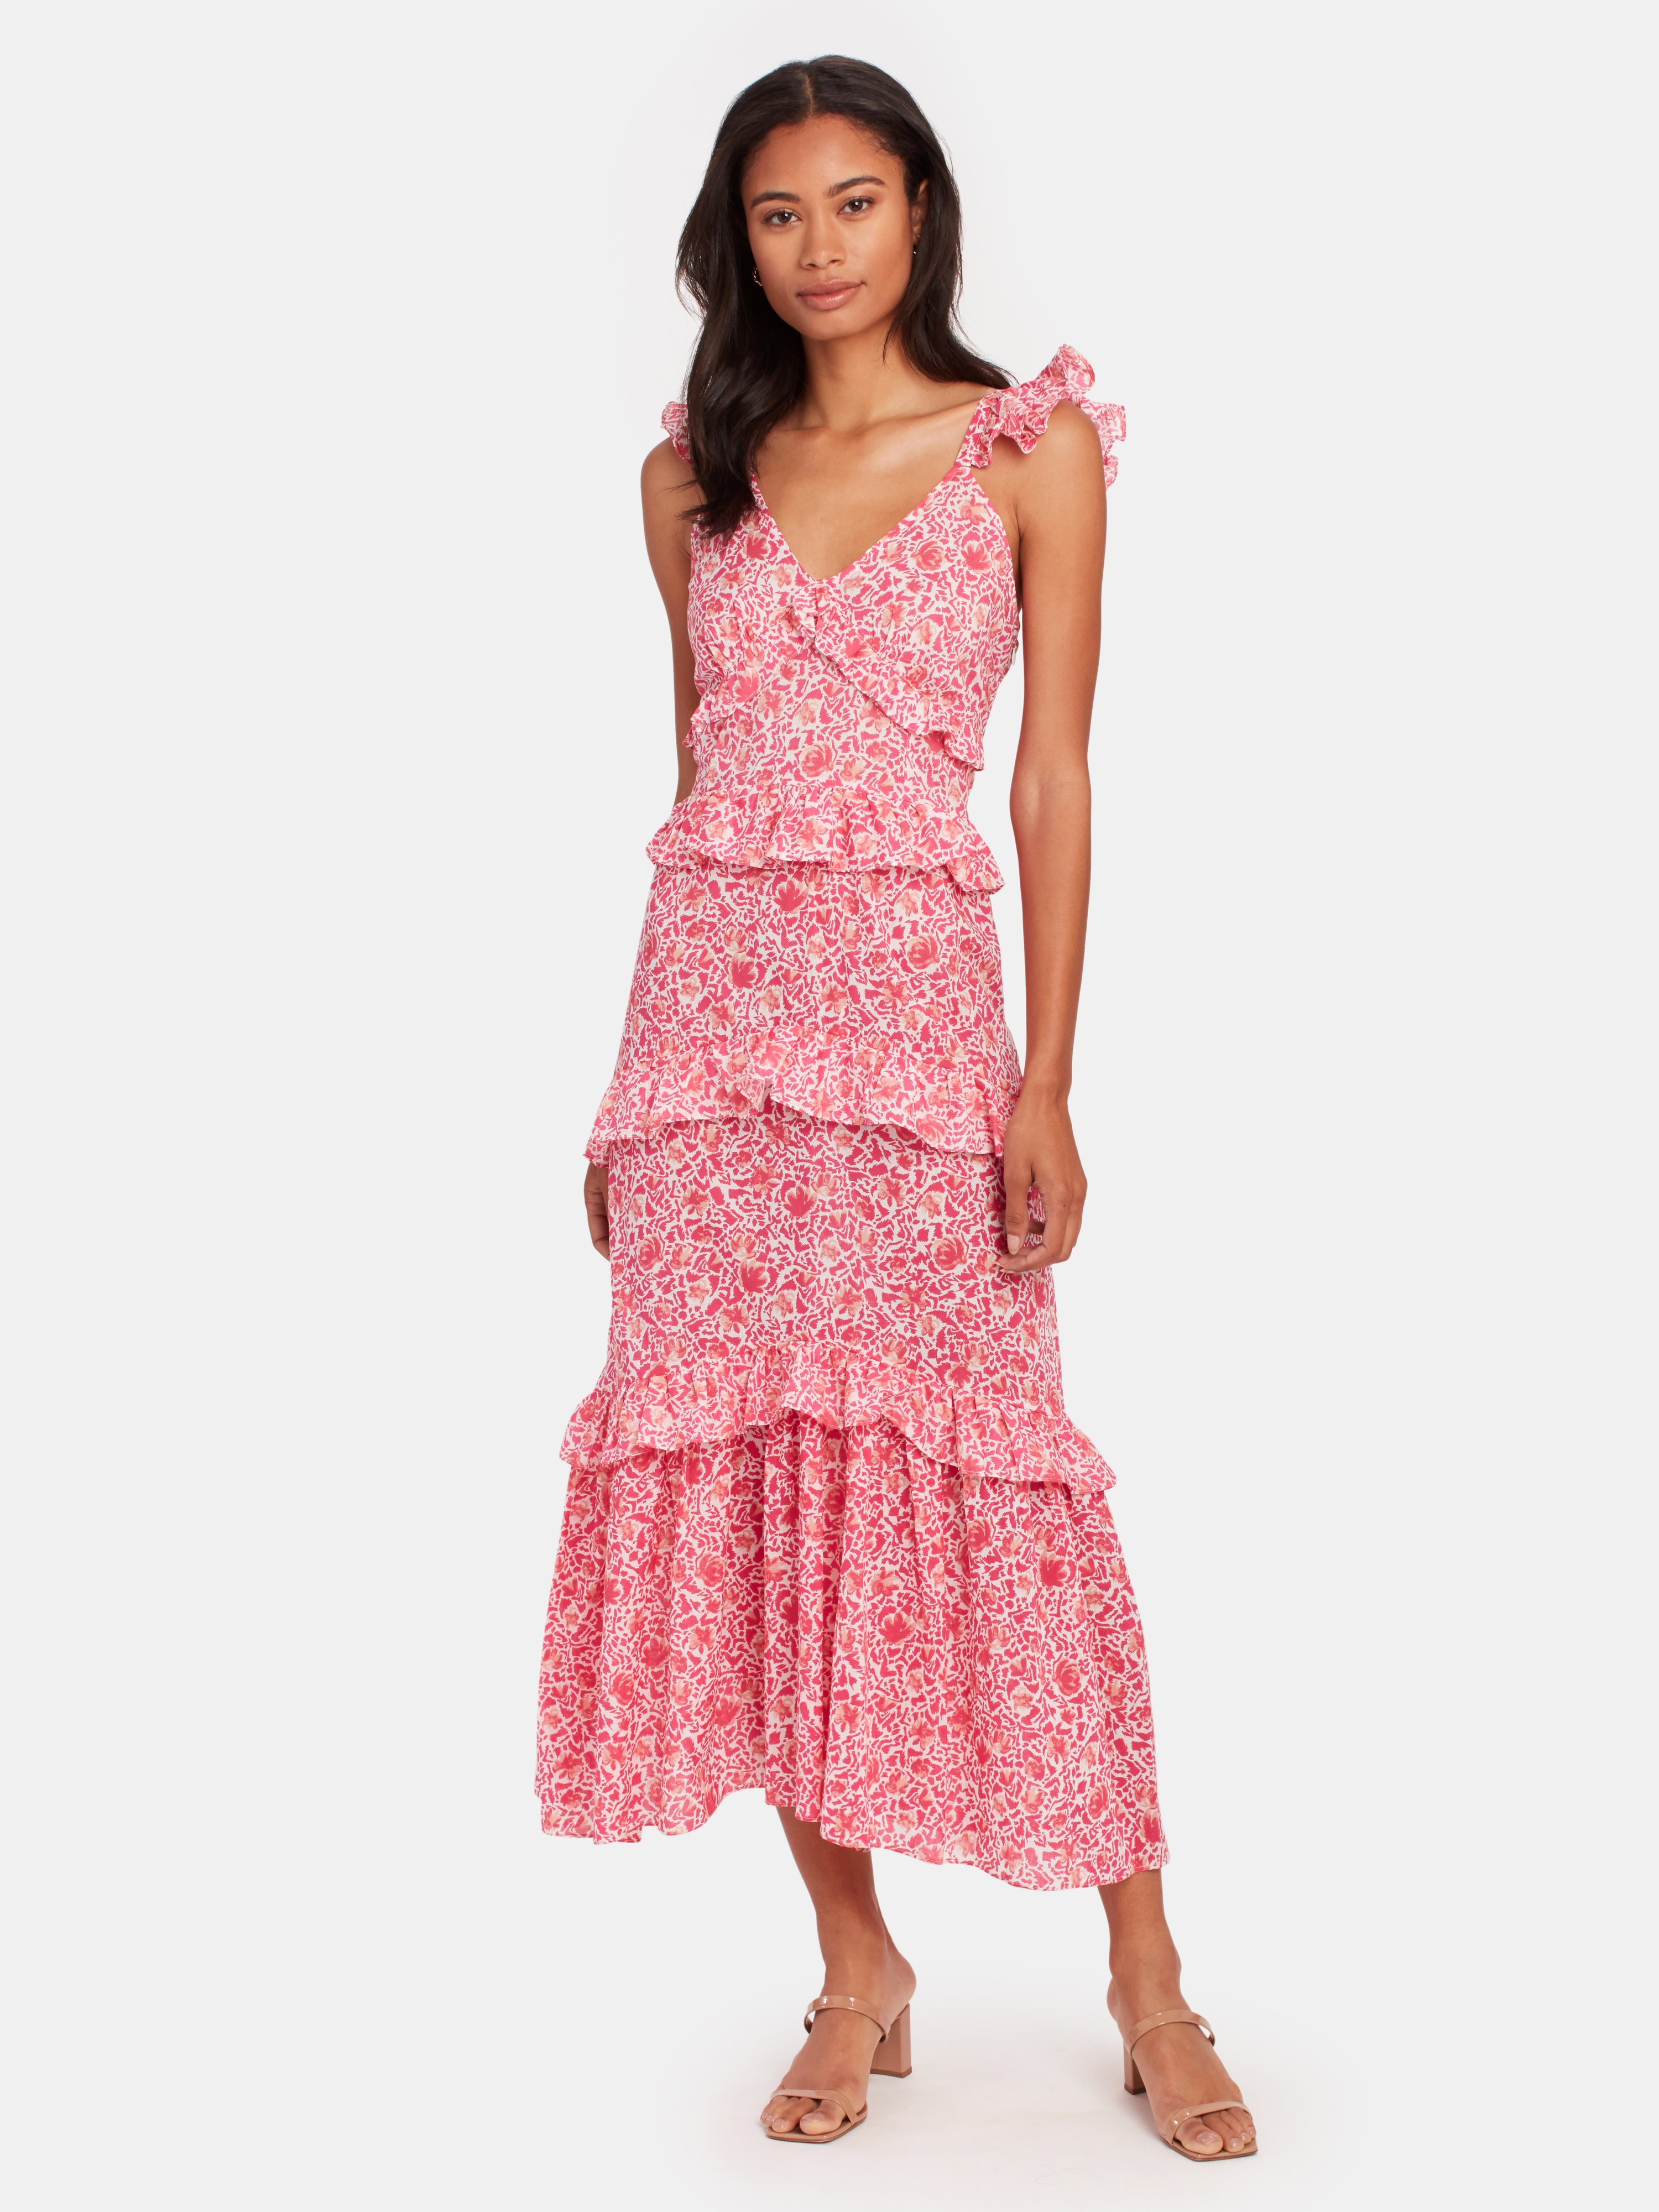 Misa Los Angeles Morrison Ruffled Floral Maxi Dress In Pink Animal Floral